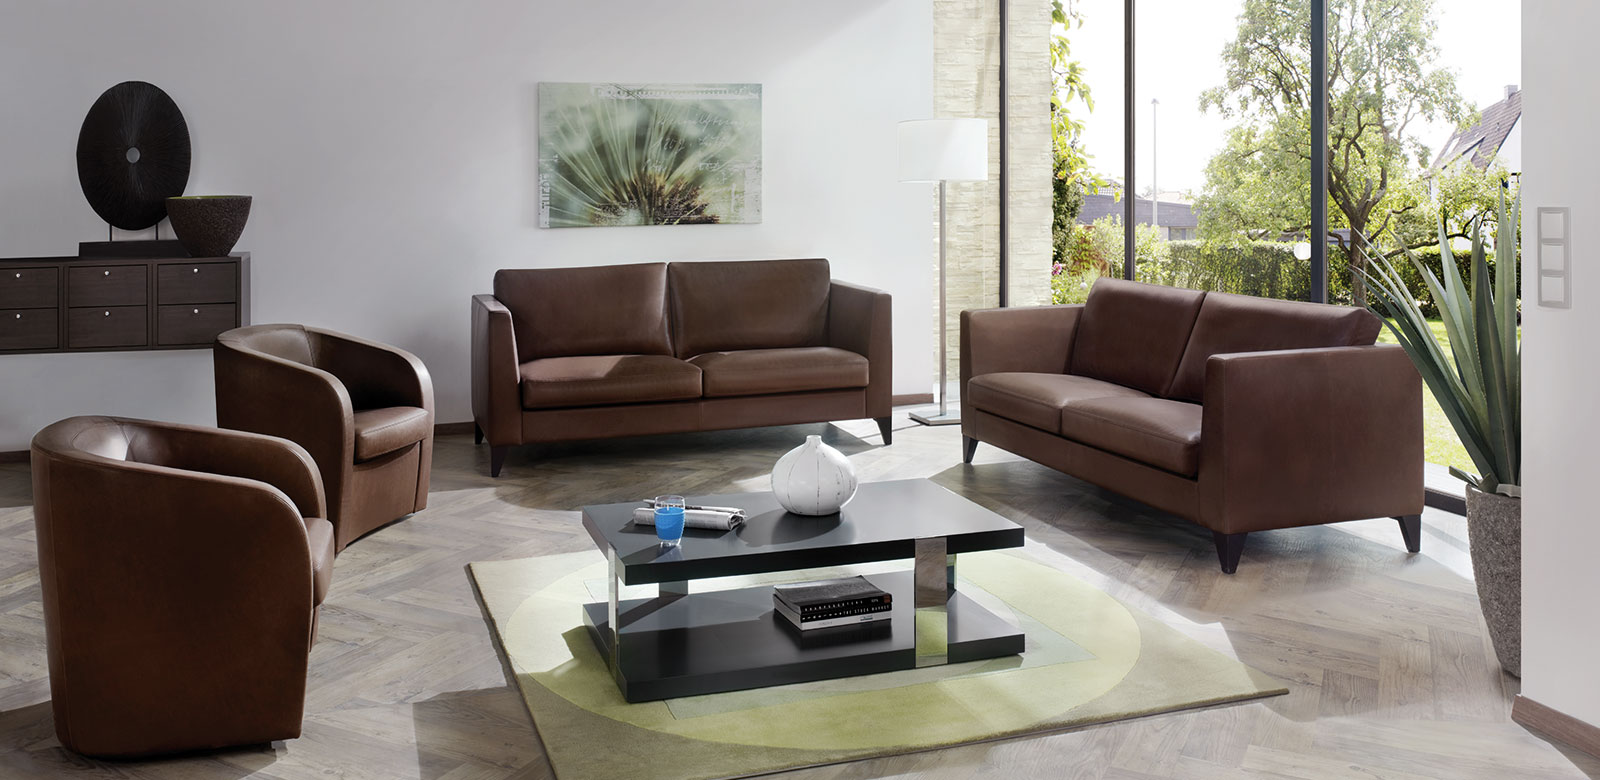 Two CL850 sofas in brown leather with matching armchairs and square coffee table in the living room with garden access